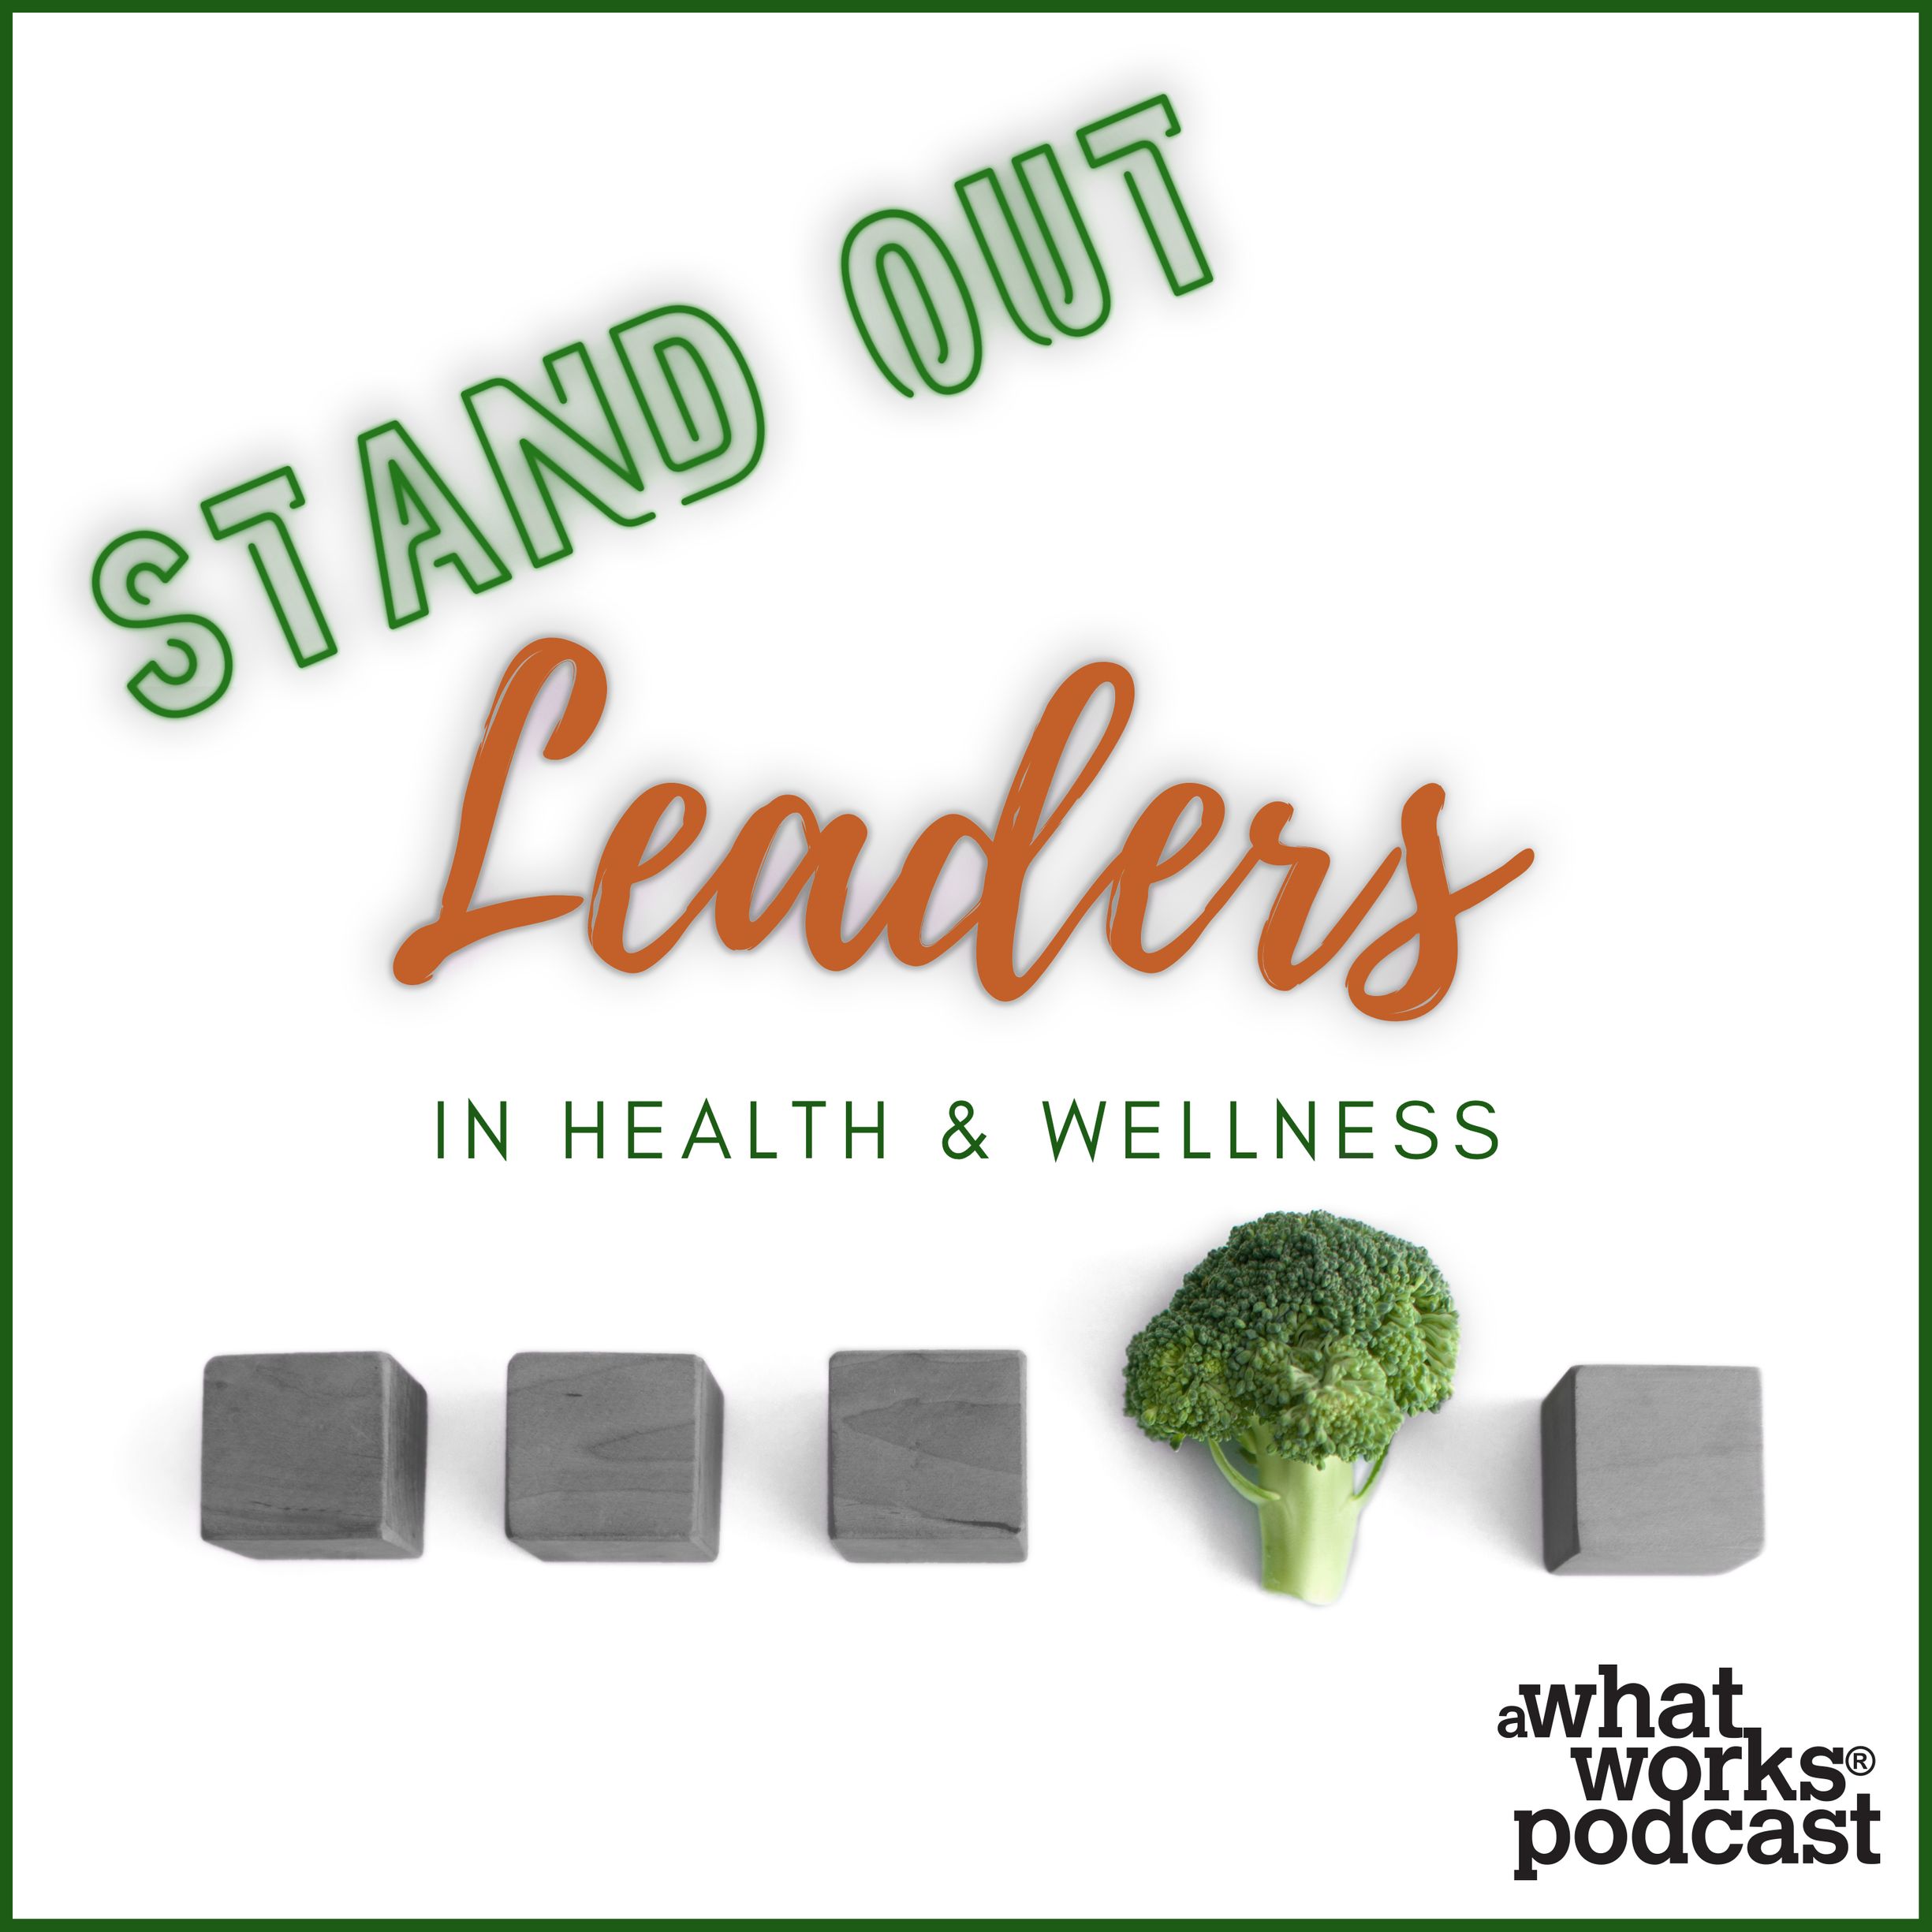 Artwork for Stand Out Leaders In Health & Wellness